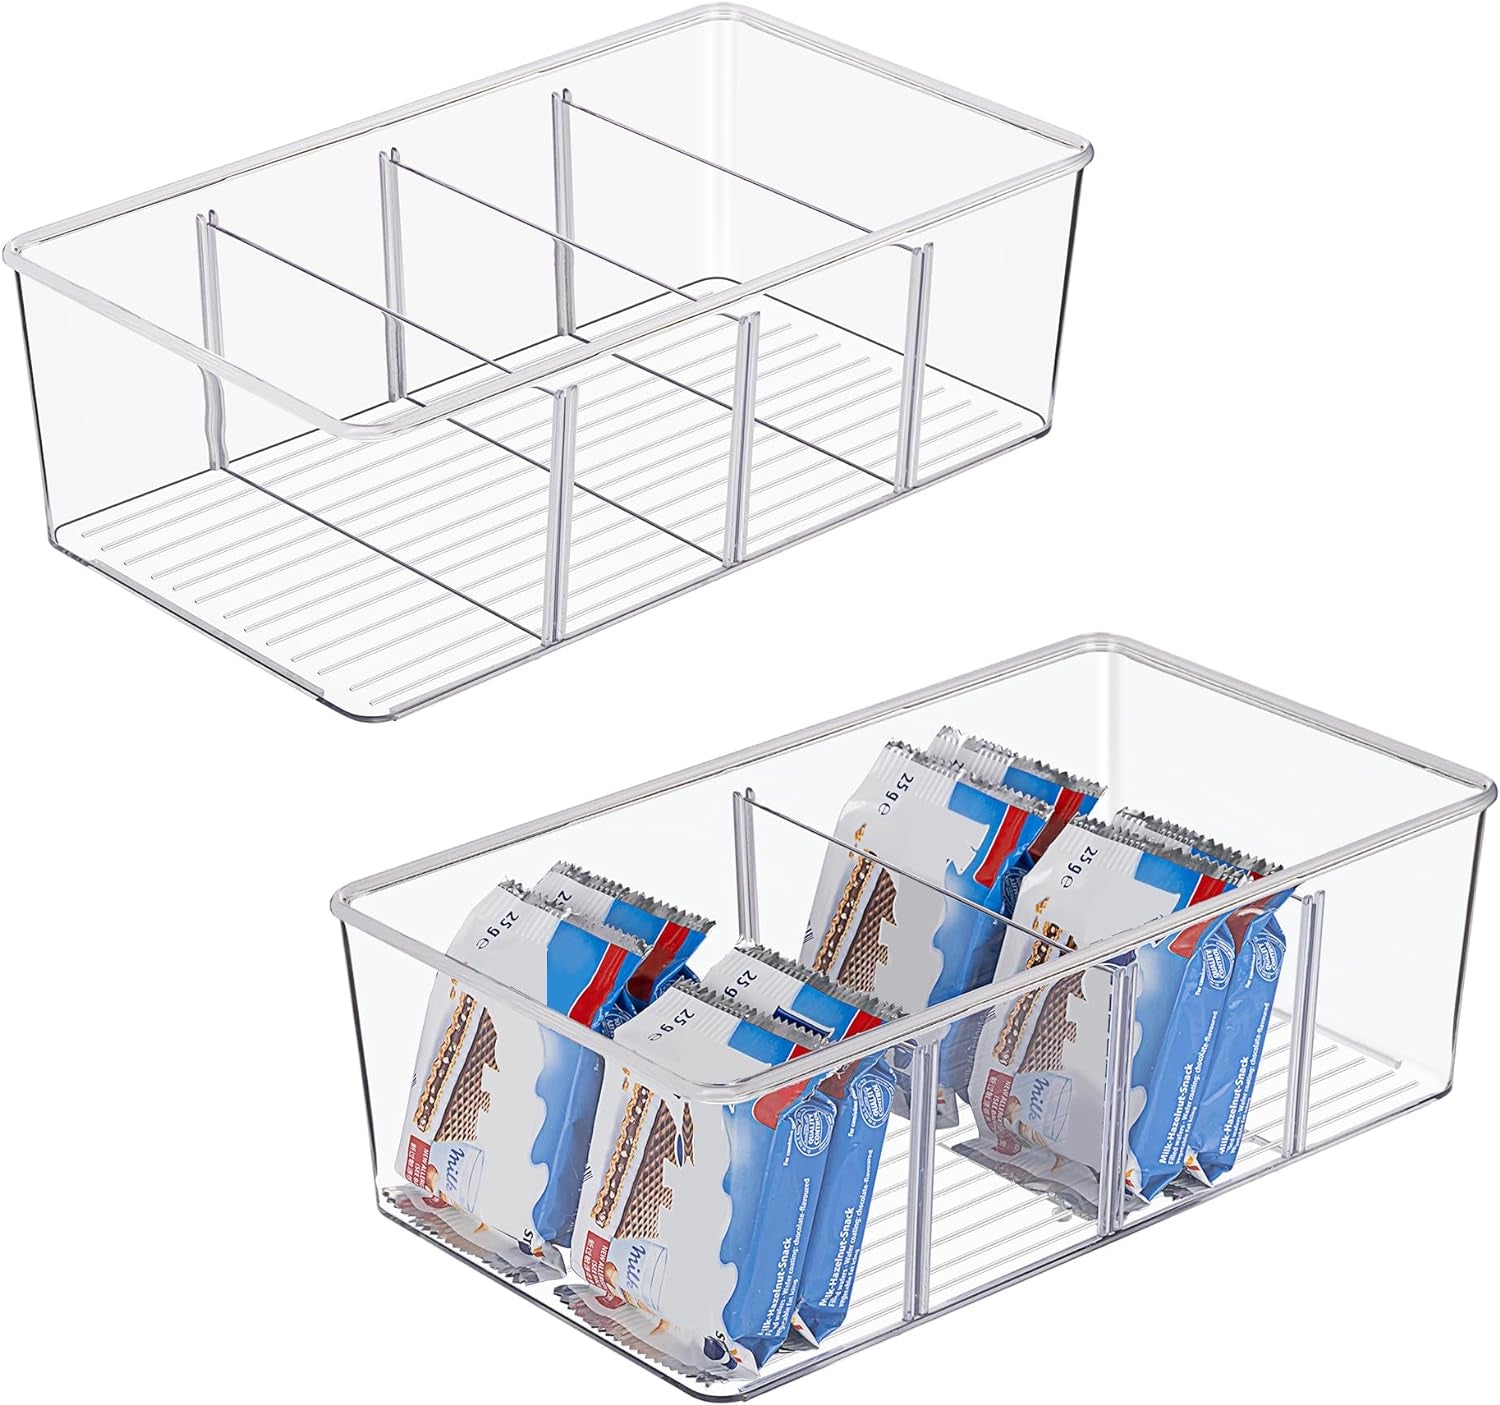 ClearSpace Plastic Pantry Organization and Storage Bins with Dividers (4 Pack)